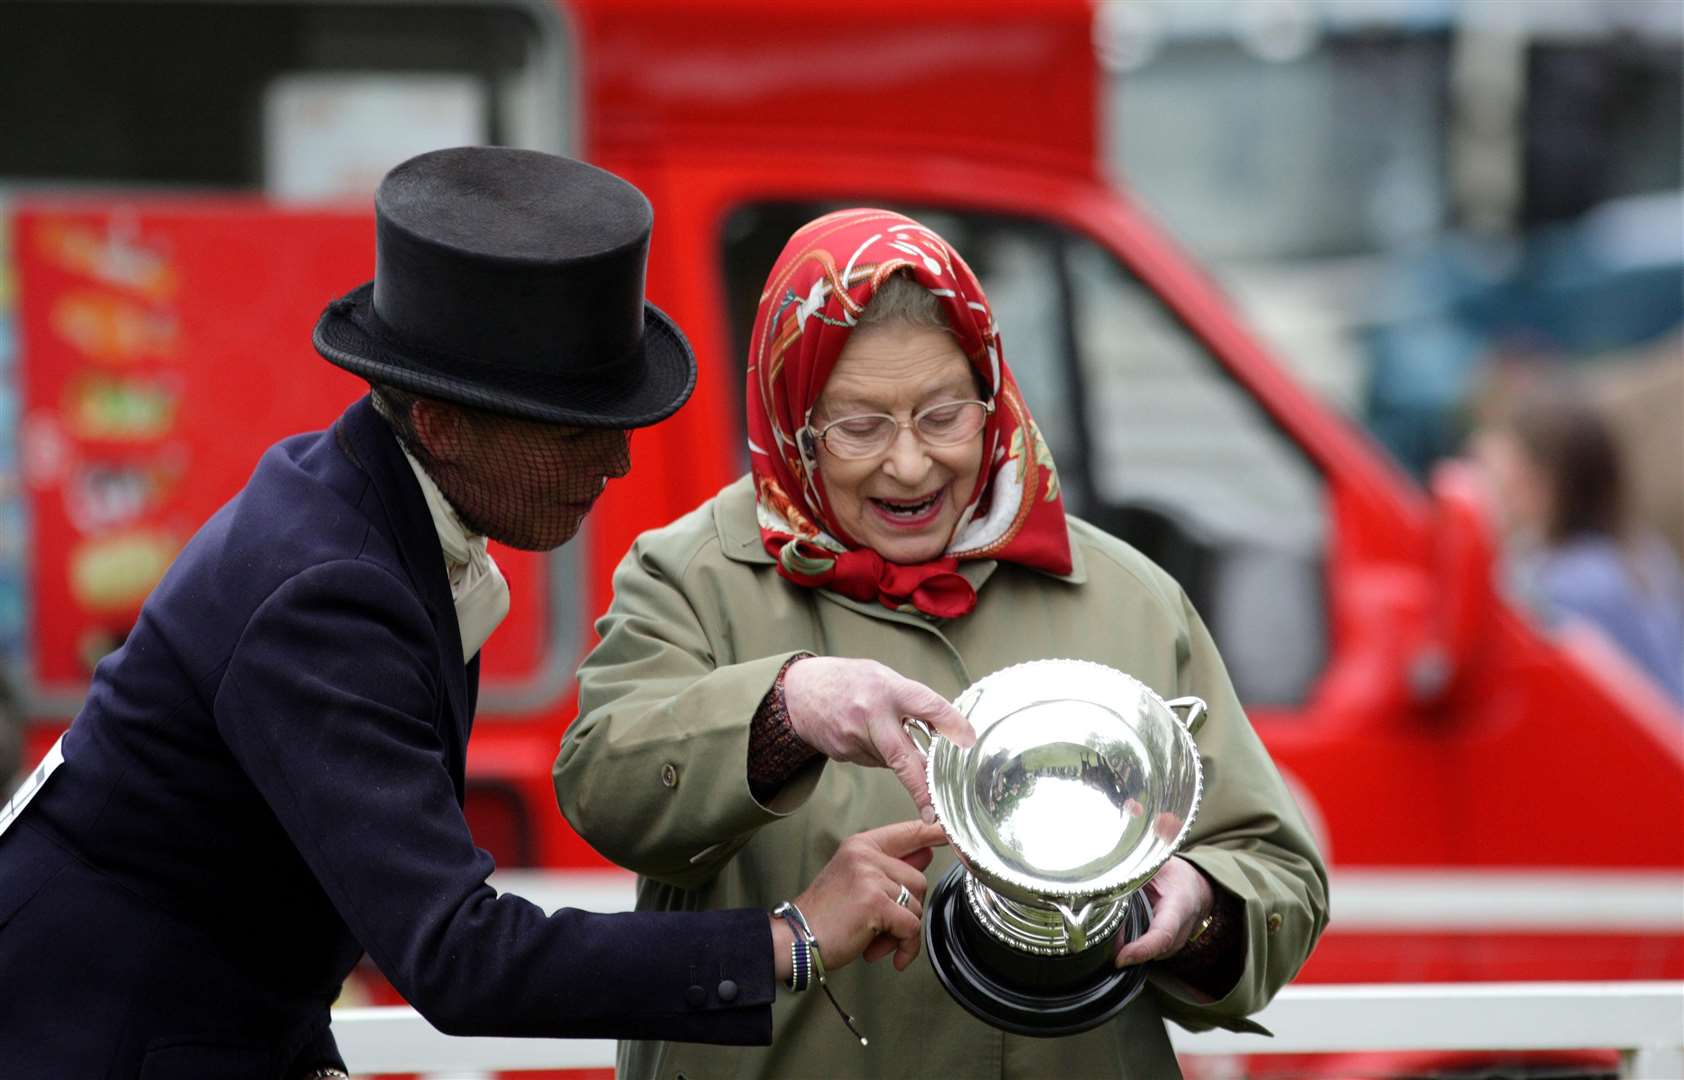 The Queen looks at the cup that her horse Stardust III won at the Royal Windsor Horse Show (Steve Parsons/PA)